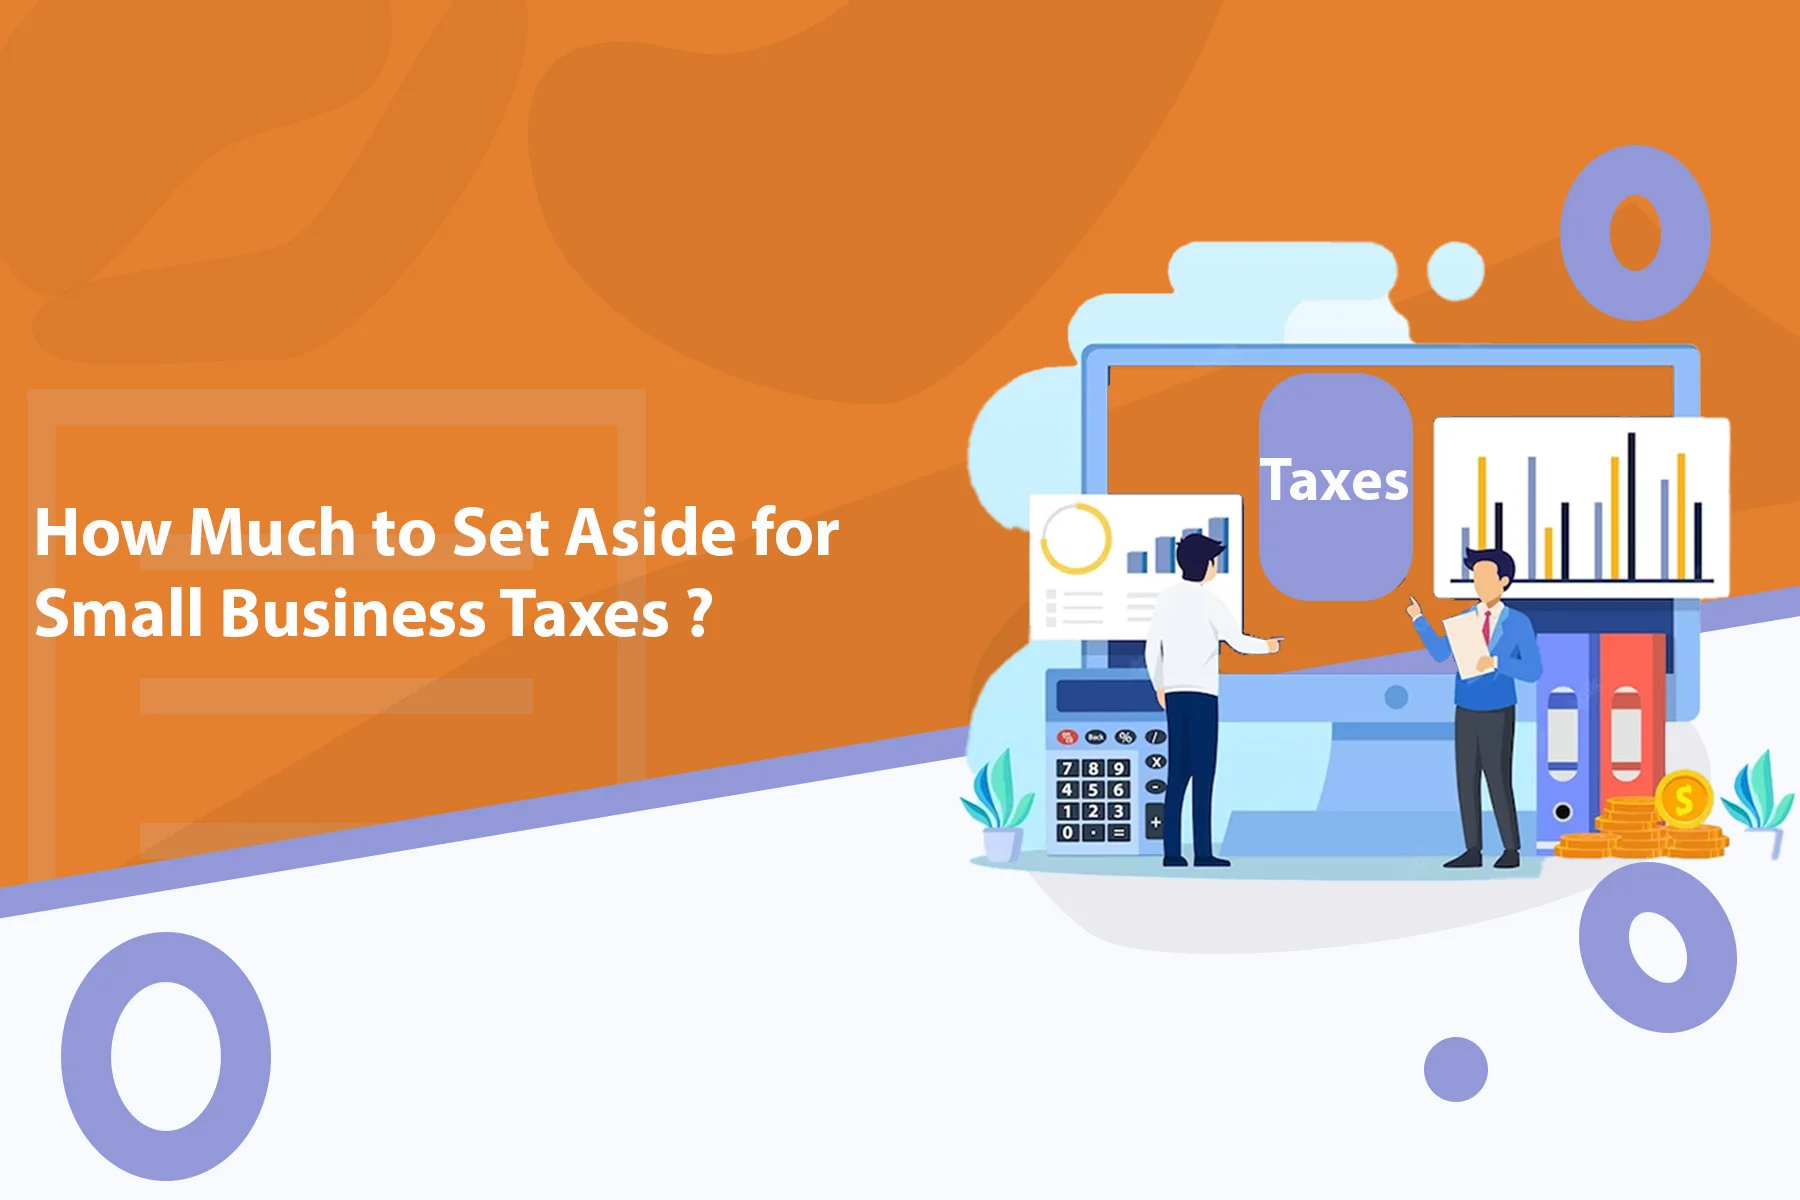 How Much to Set Aside for Small Business Taxes